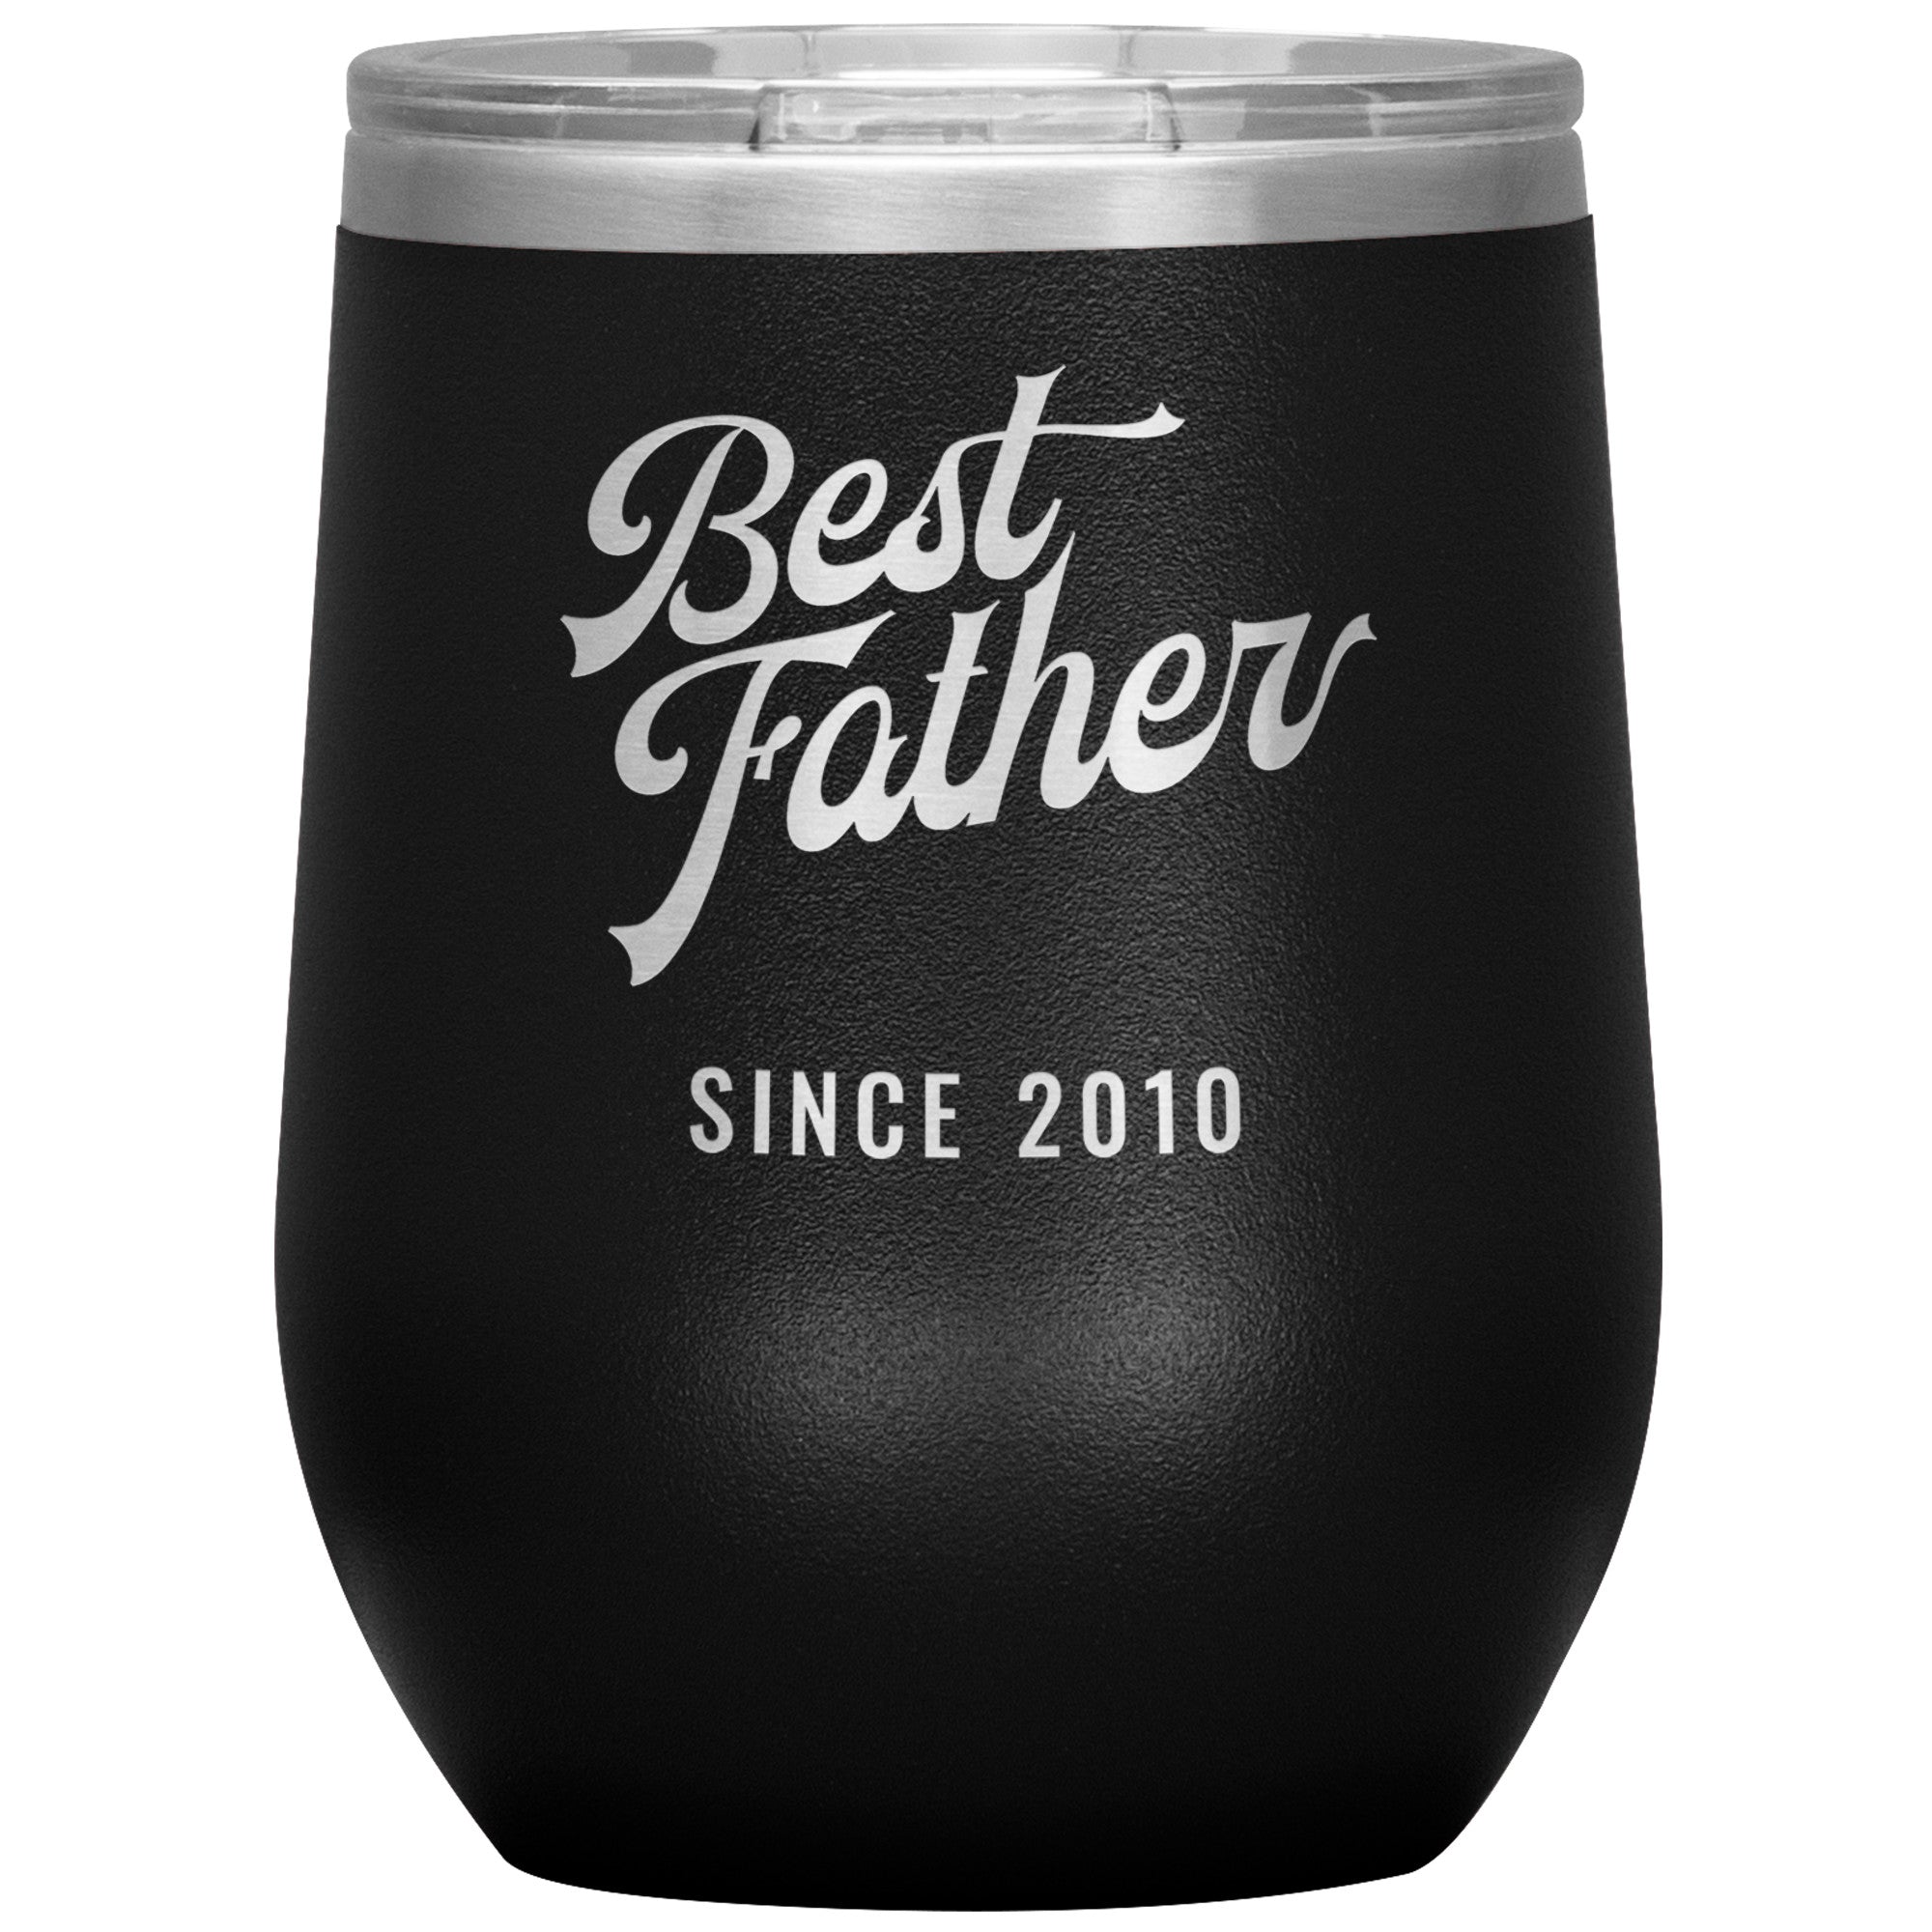 Best Father Since 2010 - 12oz Insulated Wine Tumbler